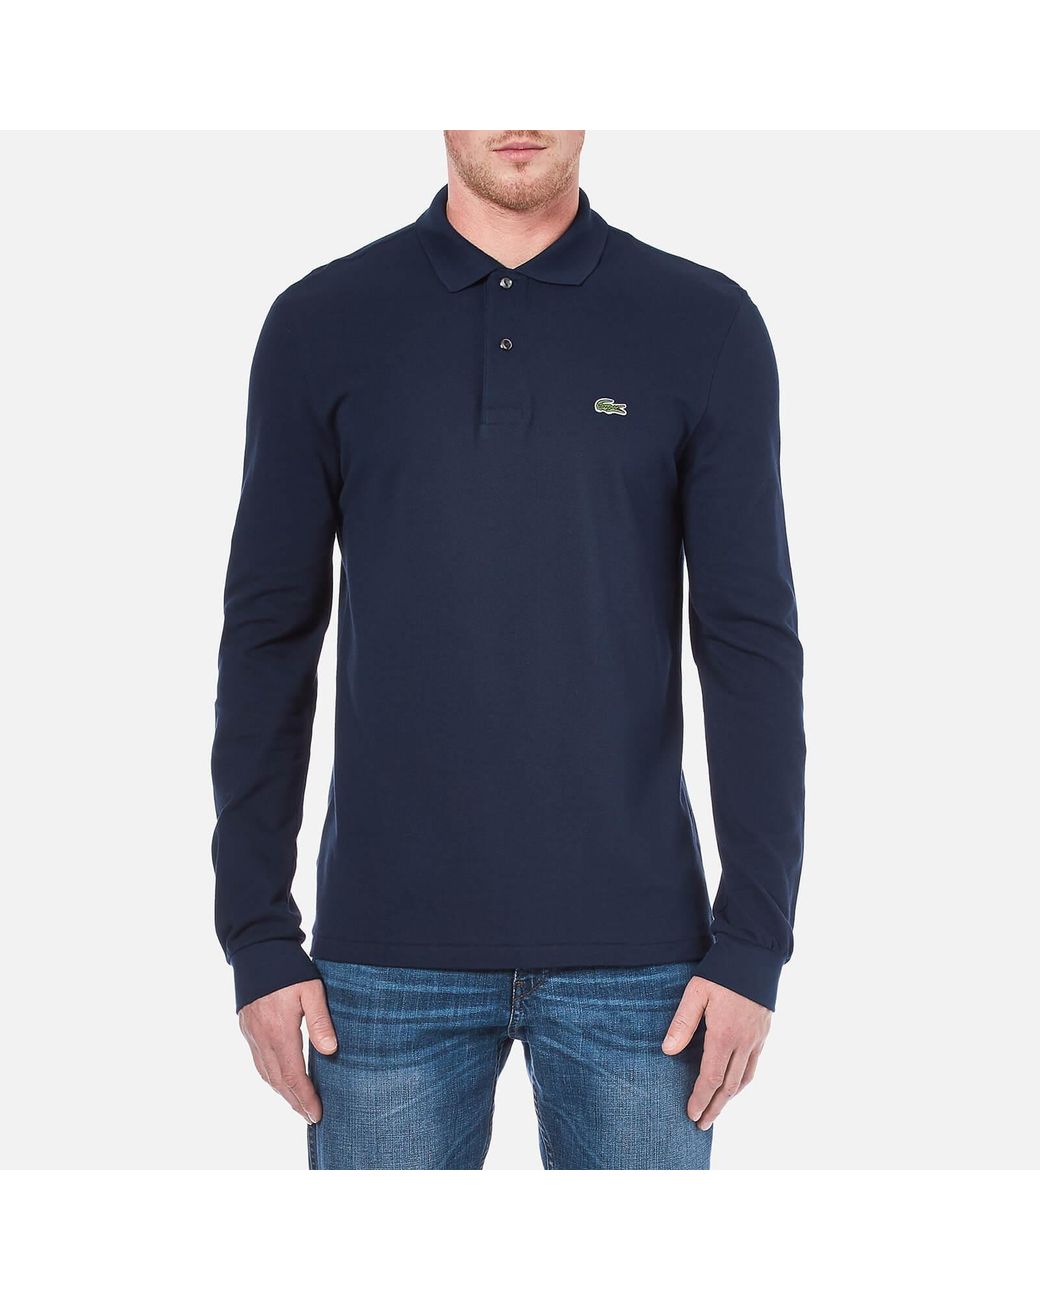 Lacoste Leather Alligator Long Sleeve Polo Shirt in Navy Blue (Blue) for  Men - Save 73% | Lyst